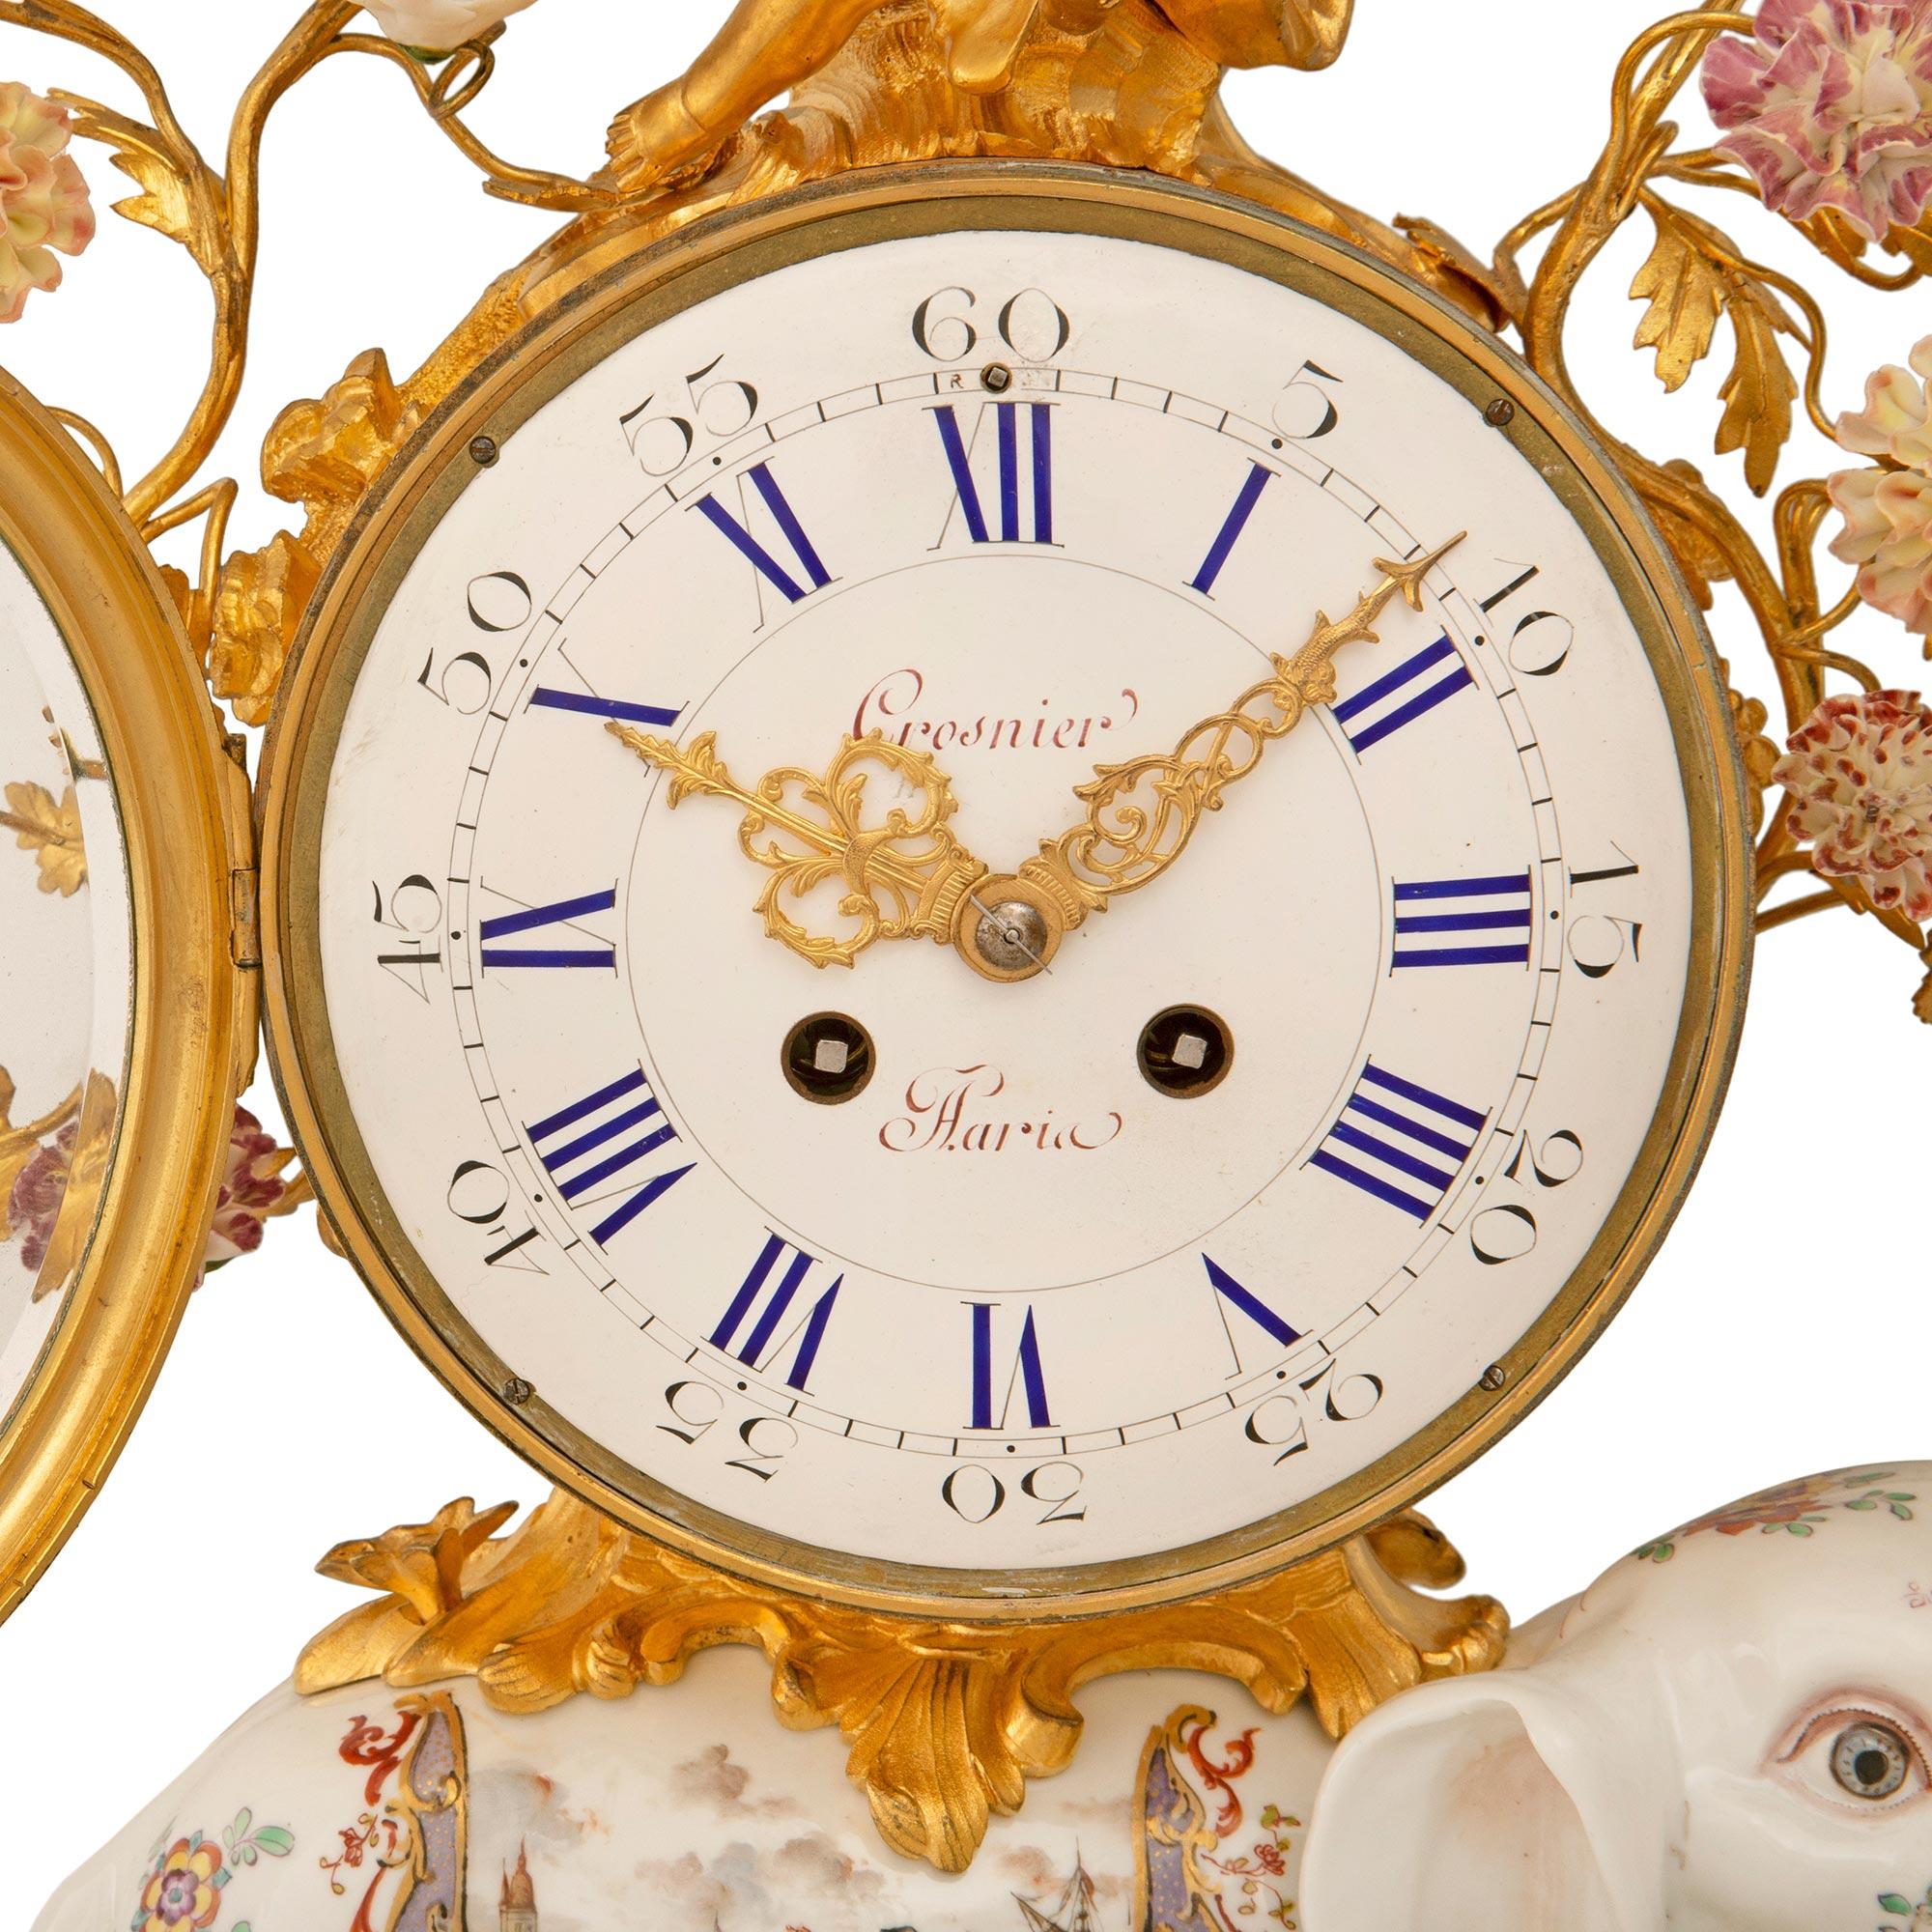 An exceptional and most decorative French 19th century Louis XV st. Meissen porcelain and ormolu clock signed Meissen and Crosnier. The clock is raised by a beautiful scrolled ground designed ormolu base with charming foliate designs in a striking